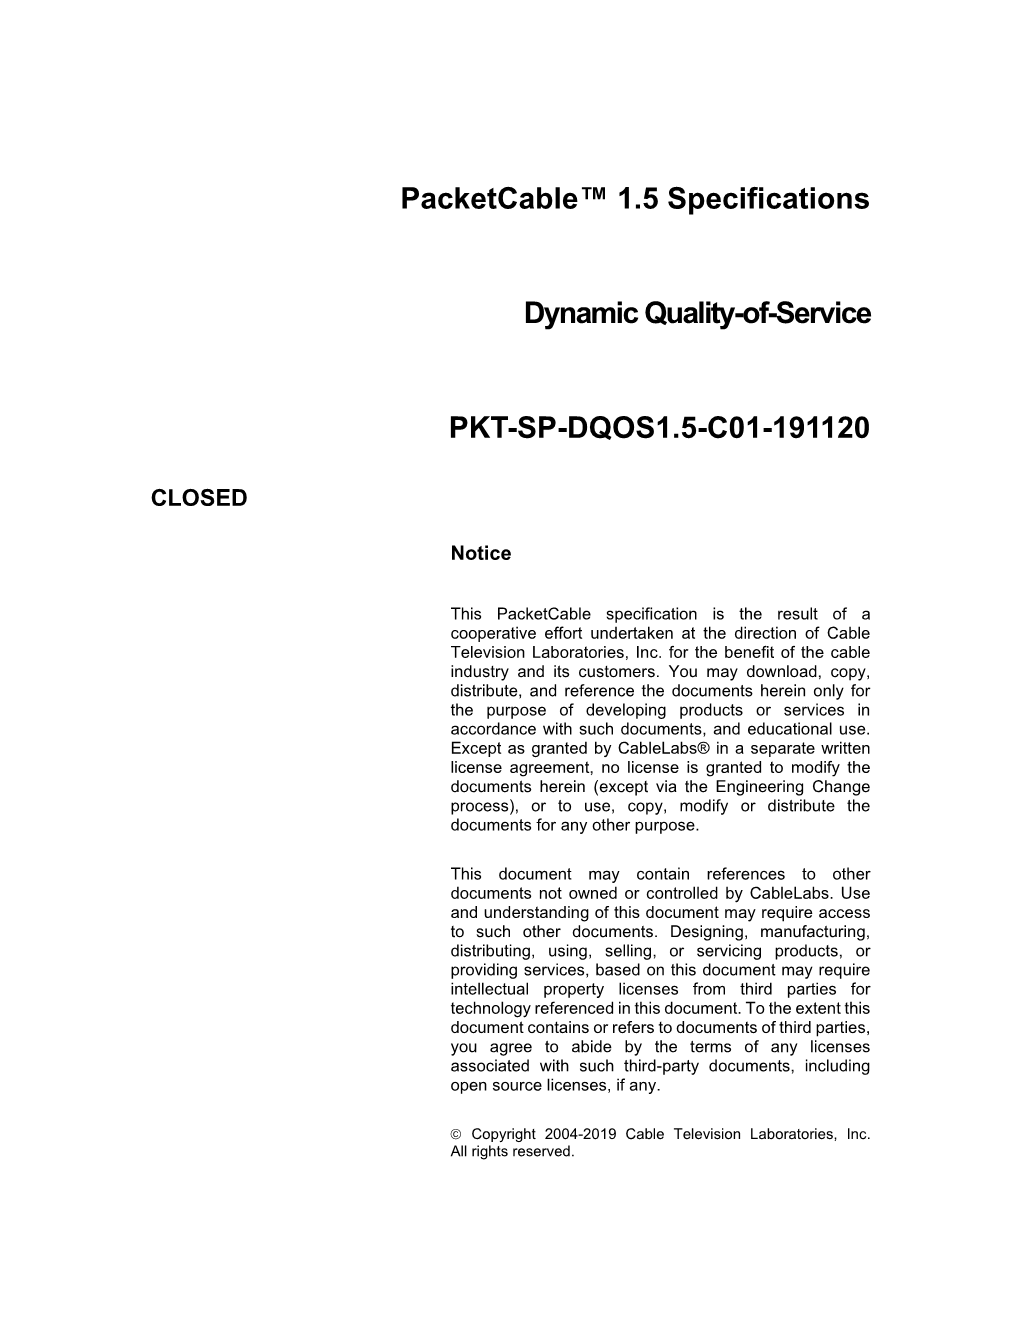 Packetcable™ 1.5 Specifications Dynamic Quality-Of-Service PKT-SP